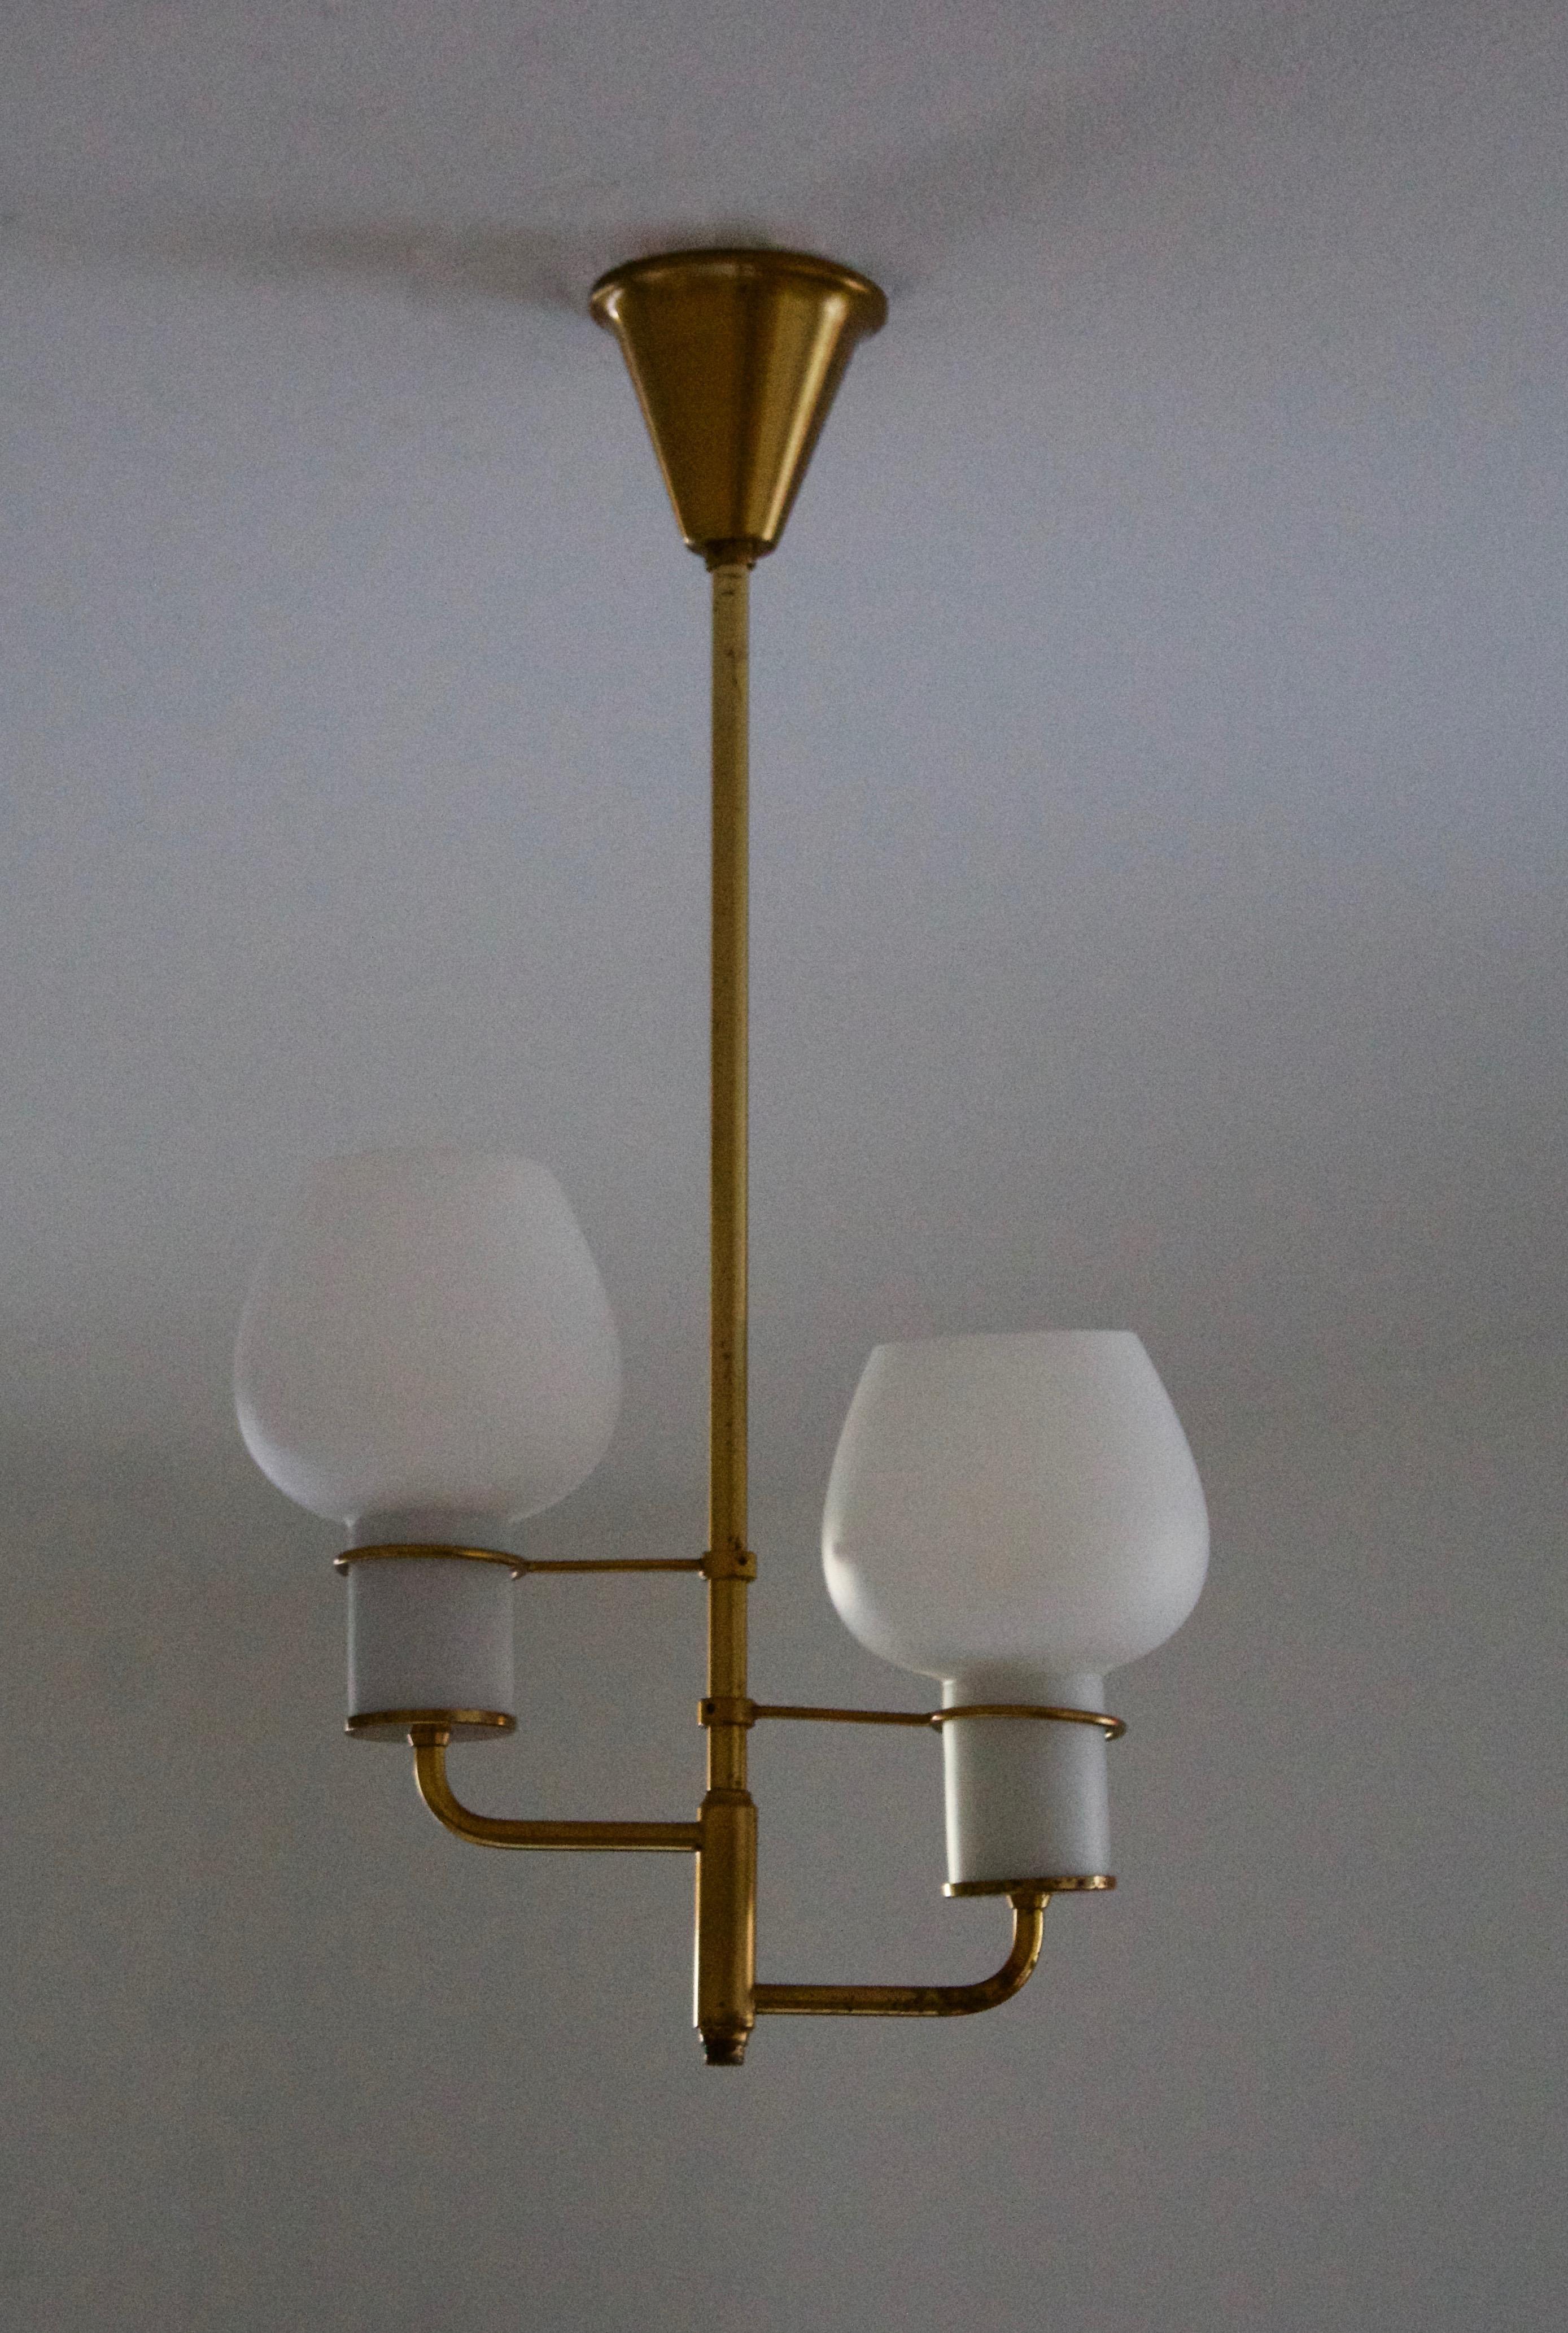 A pendant light / chandelier. Production attributed to Lyfa, Denmark, 1940s-1950s.

Other designers of the period include Paavo Tynell, Jean Royère, Josef Frank, Kaare Klint, and Alvar Aalto.